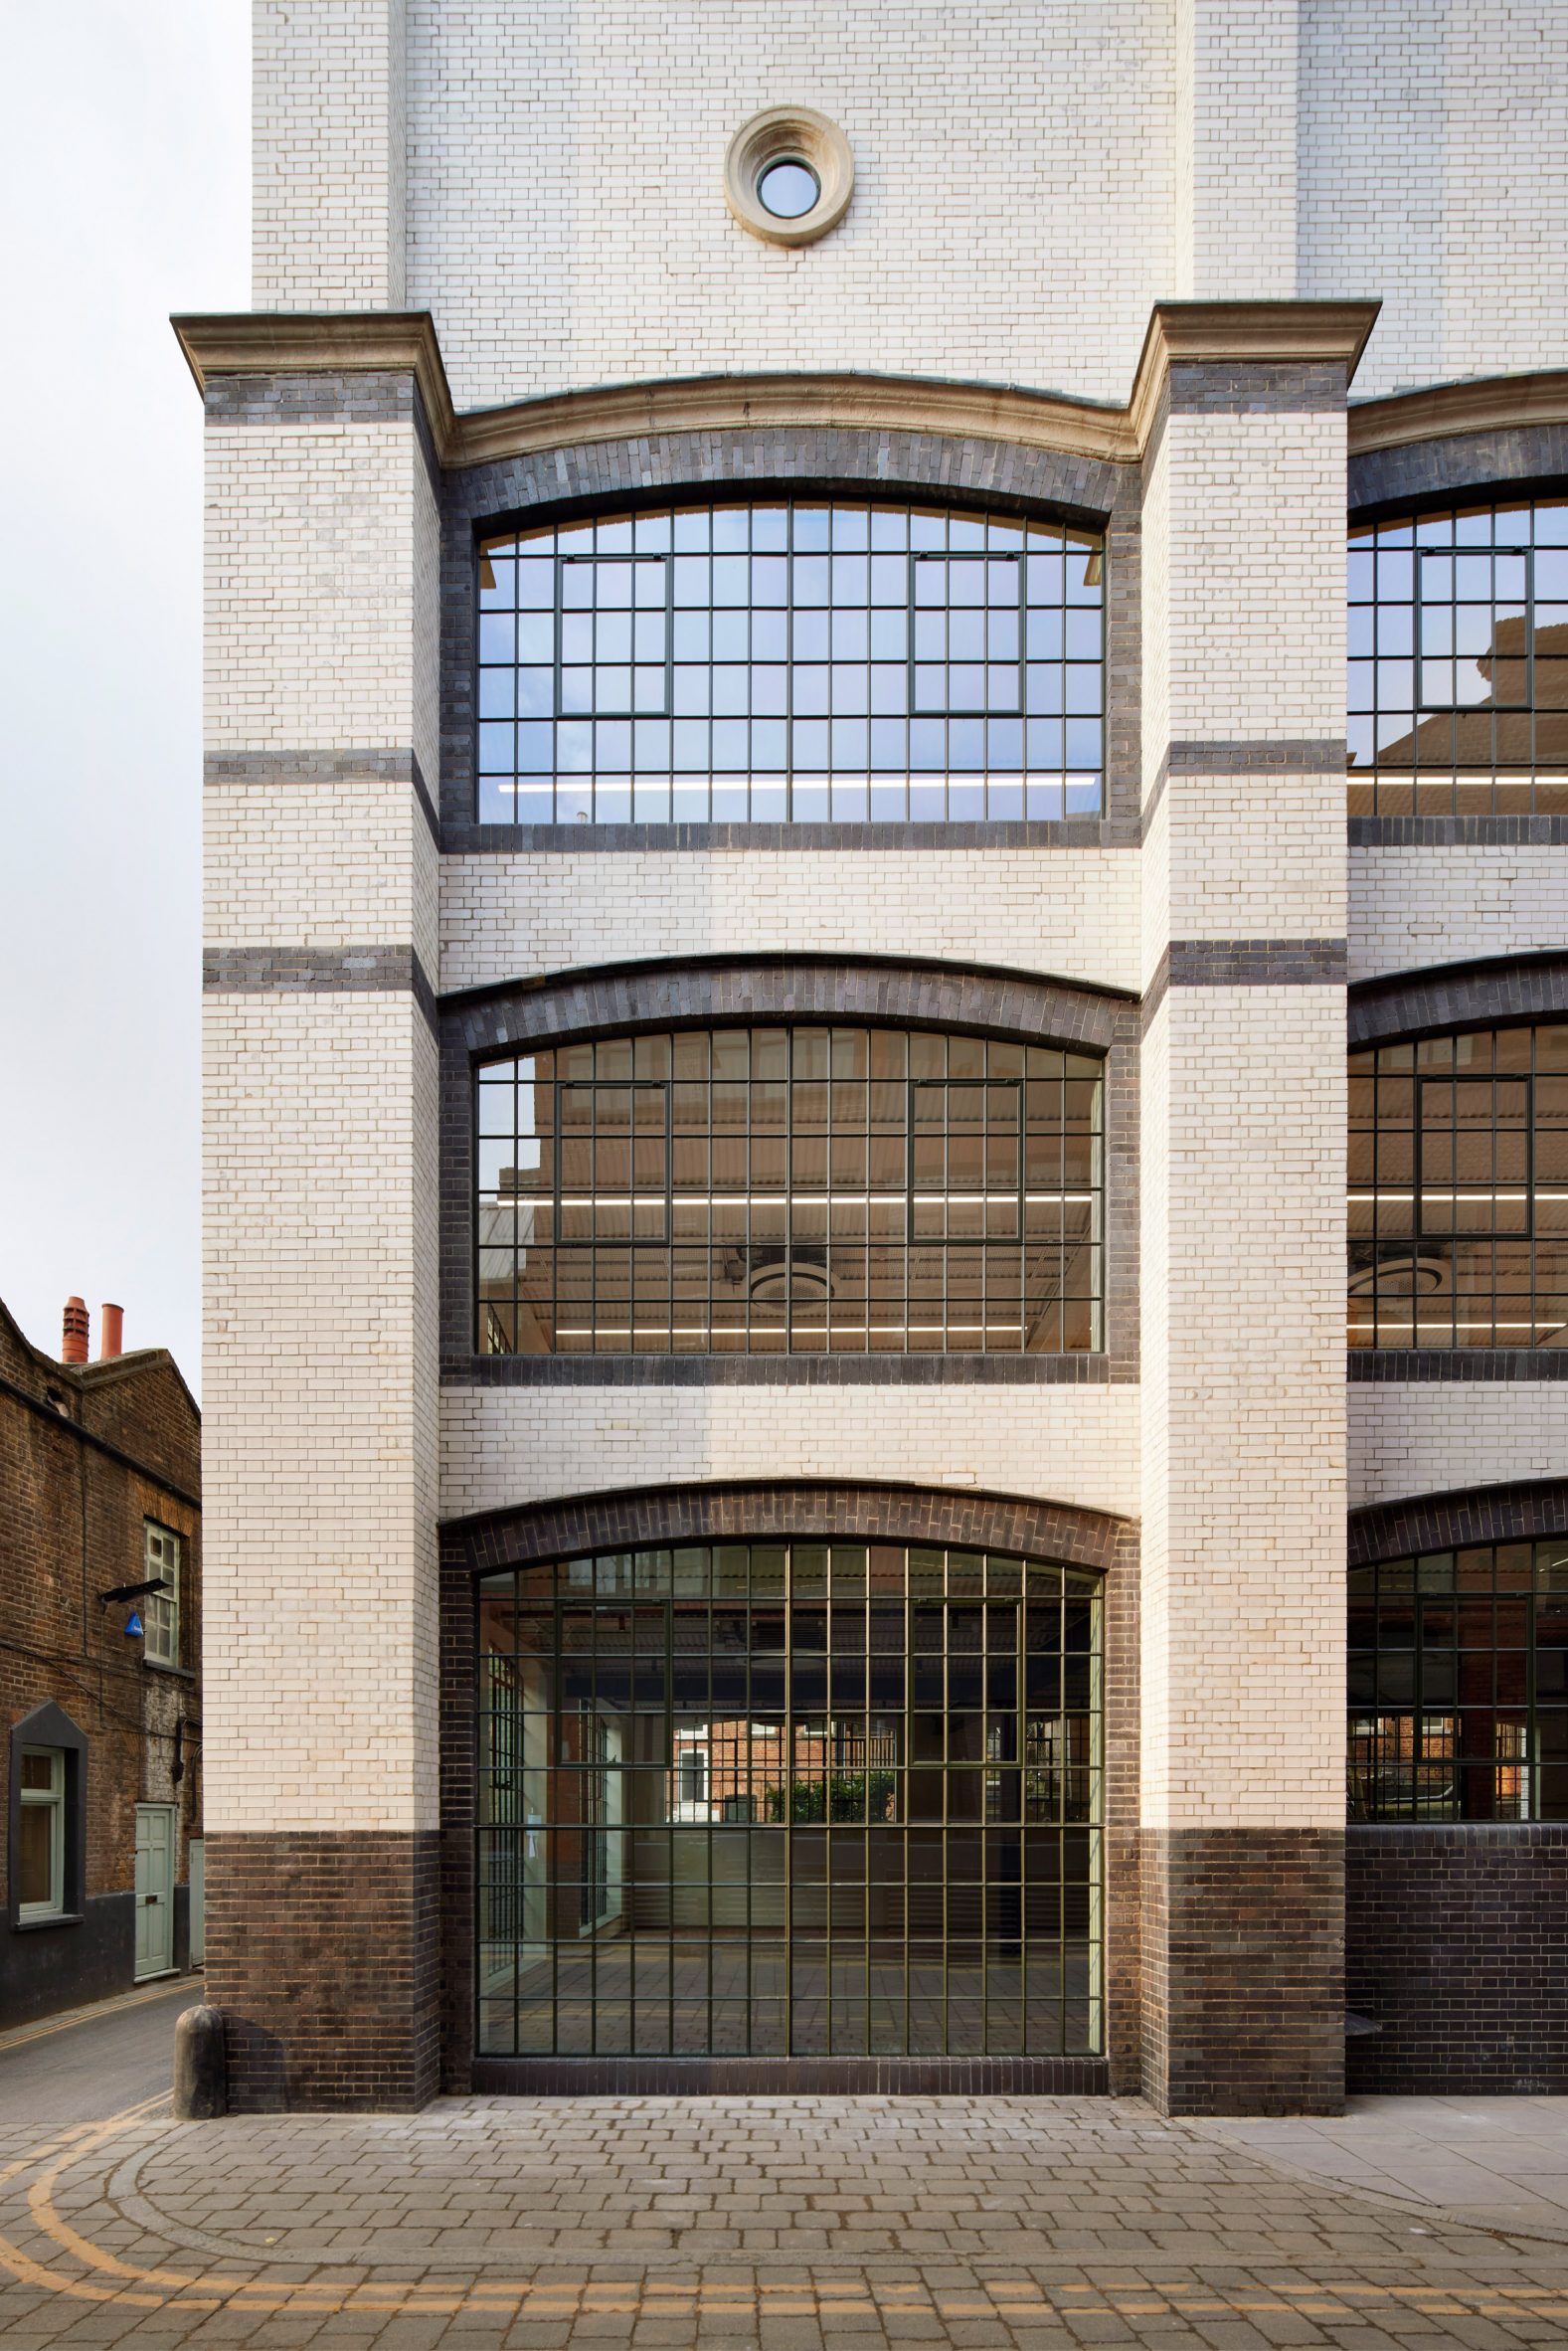 Exterior view of wallpaper factory by dMFK Architects and Dorrington